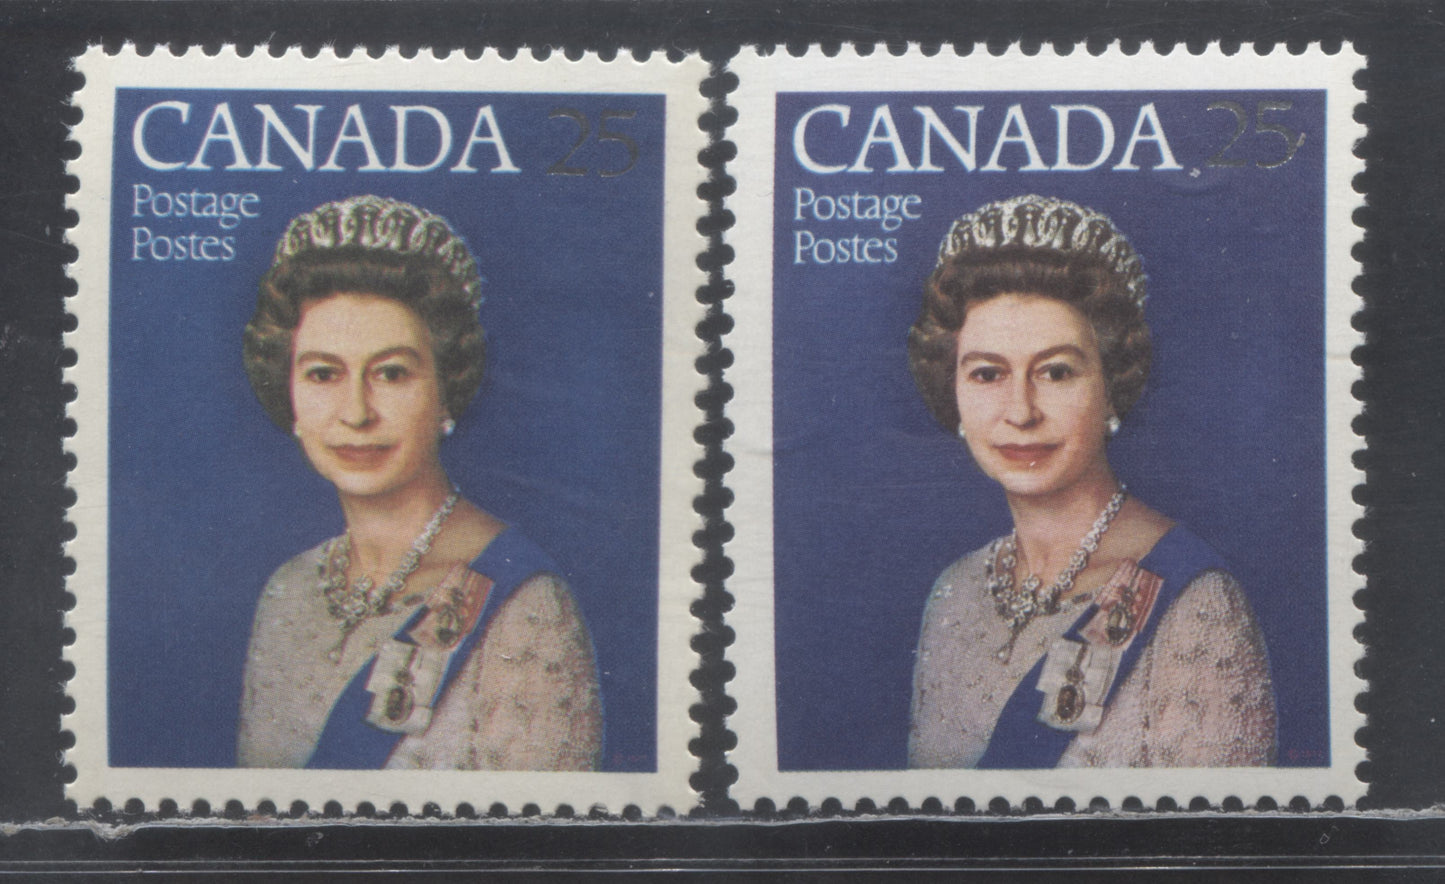 Lot 446 Canada #704var 25c Silver & Multicolored Queen Elizabeth II, 1977 Silver Jubilee Issue, 2 VFNH Singles With Violet Blue Shifted Very Slightly To The Right, Resulting In 'Blurry Appearance', Normal For Comparison